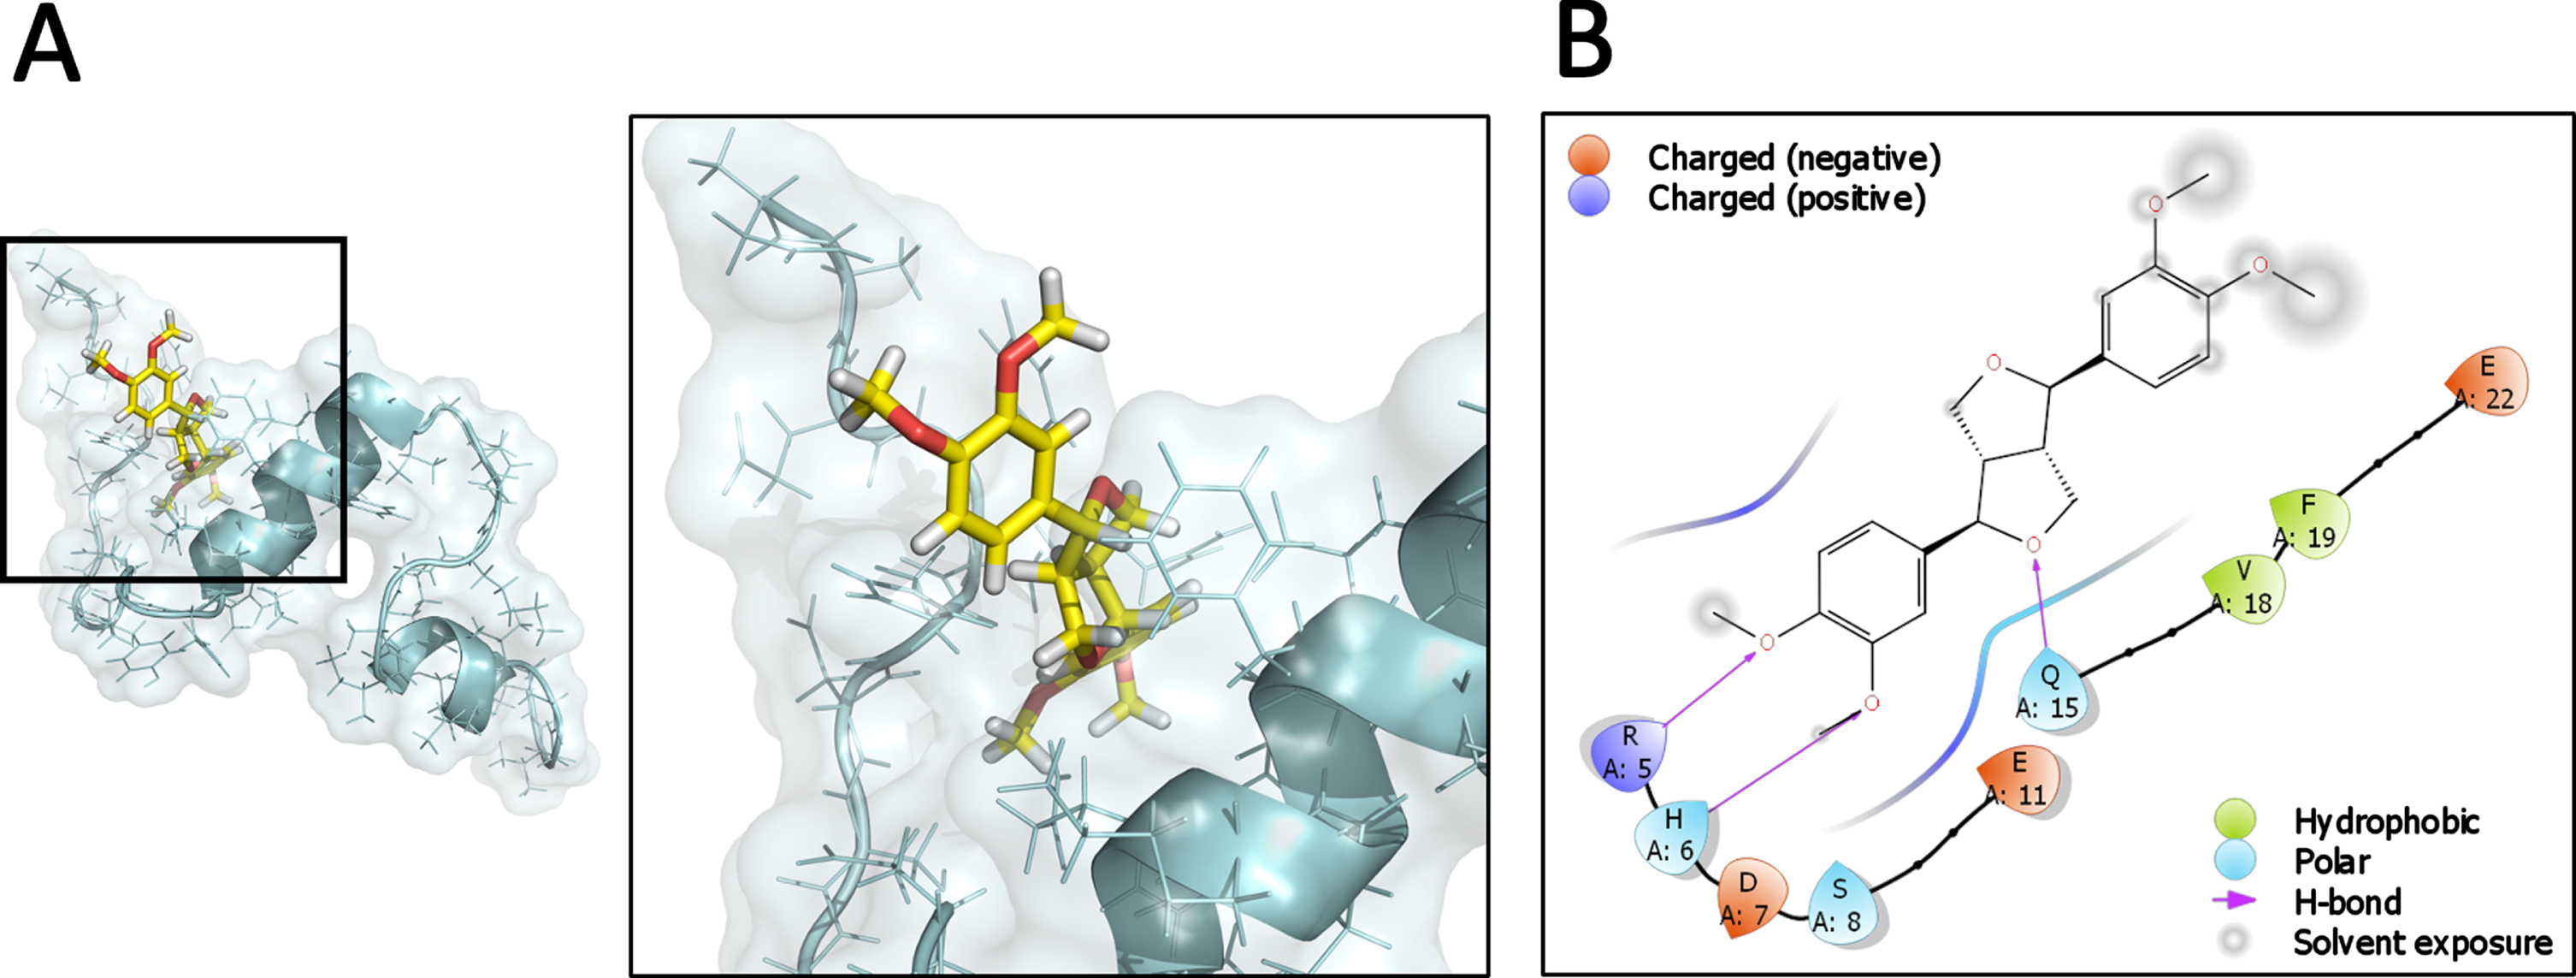 Predicted interaction of the Aβ1-40 monomer with Eudesmin. Complex between Aβ and Eudesmin generated by docking protein-ligand. Cartoon representation and surface of Aβ1-40 monomer has been colored cyan, while the carbon backbone and oxygen atoms of Eudesmin are shown yellow and red, respectively (A). Schematic representation of the interactions presents at the Aβ-Eu interface in a region defined with a cutoff of 4Å (B).